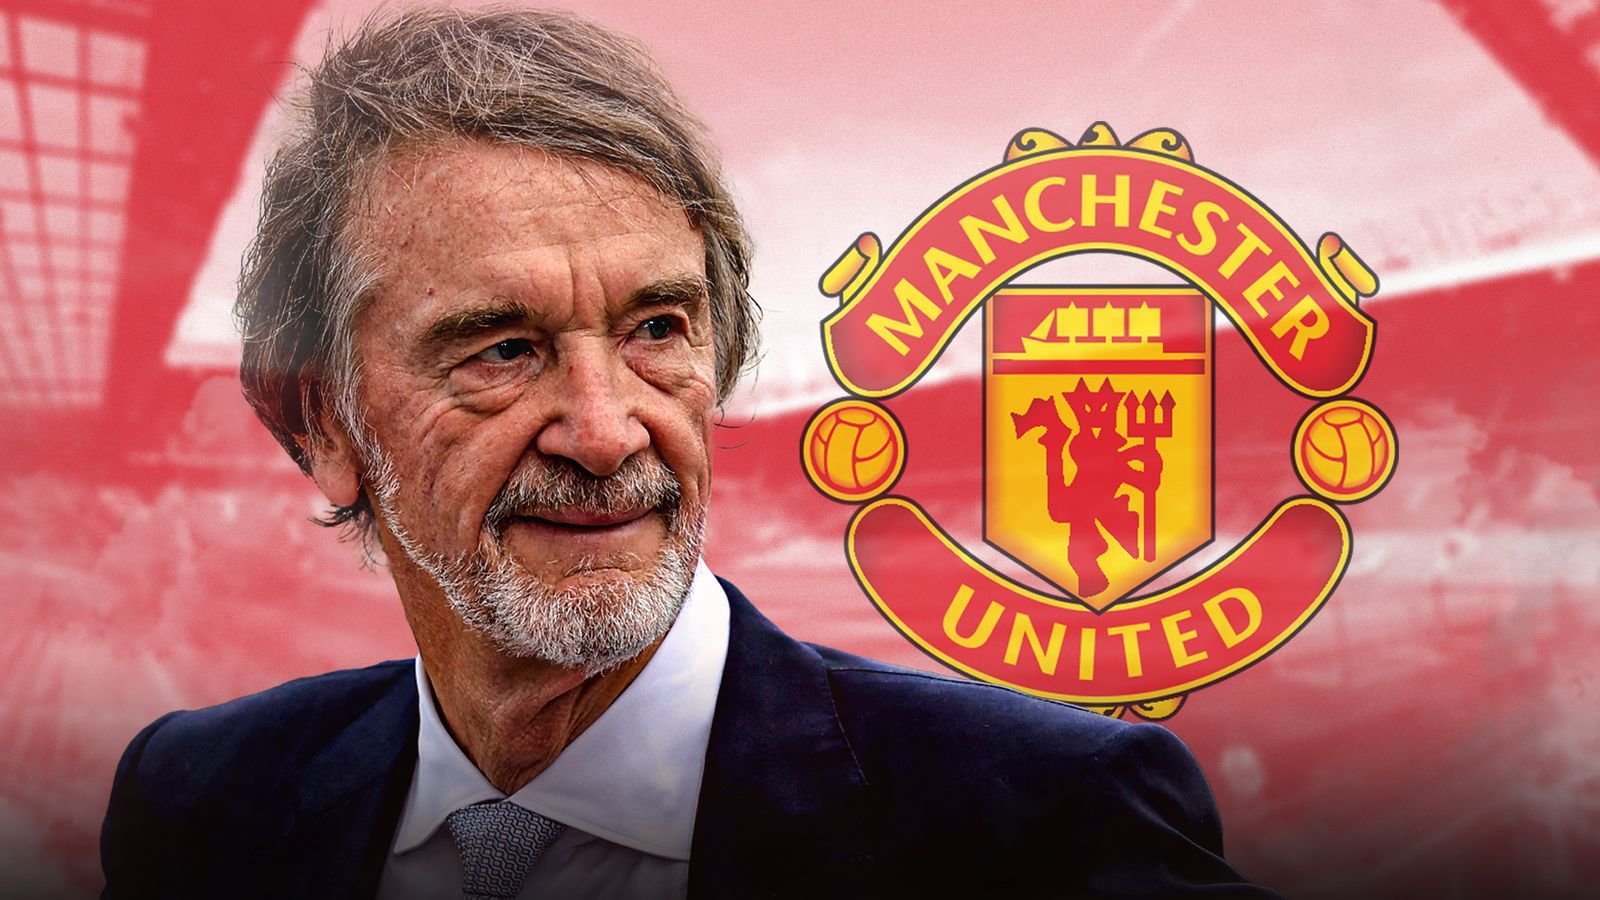 Manchester United takeover: Sir Jim Ratcliffe’s deal to purchase 25 per cent of club to be announced | Football News